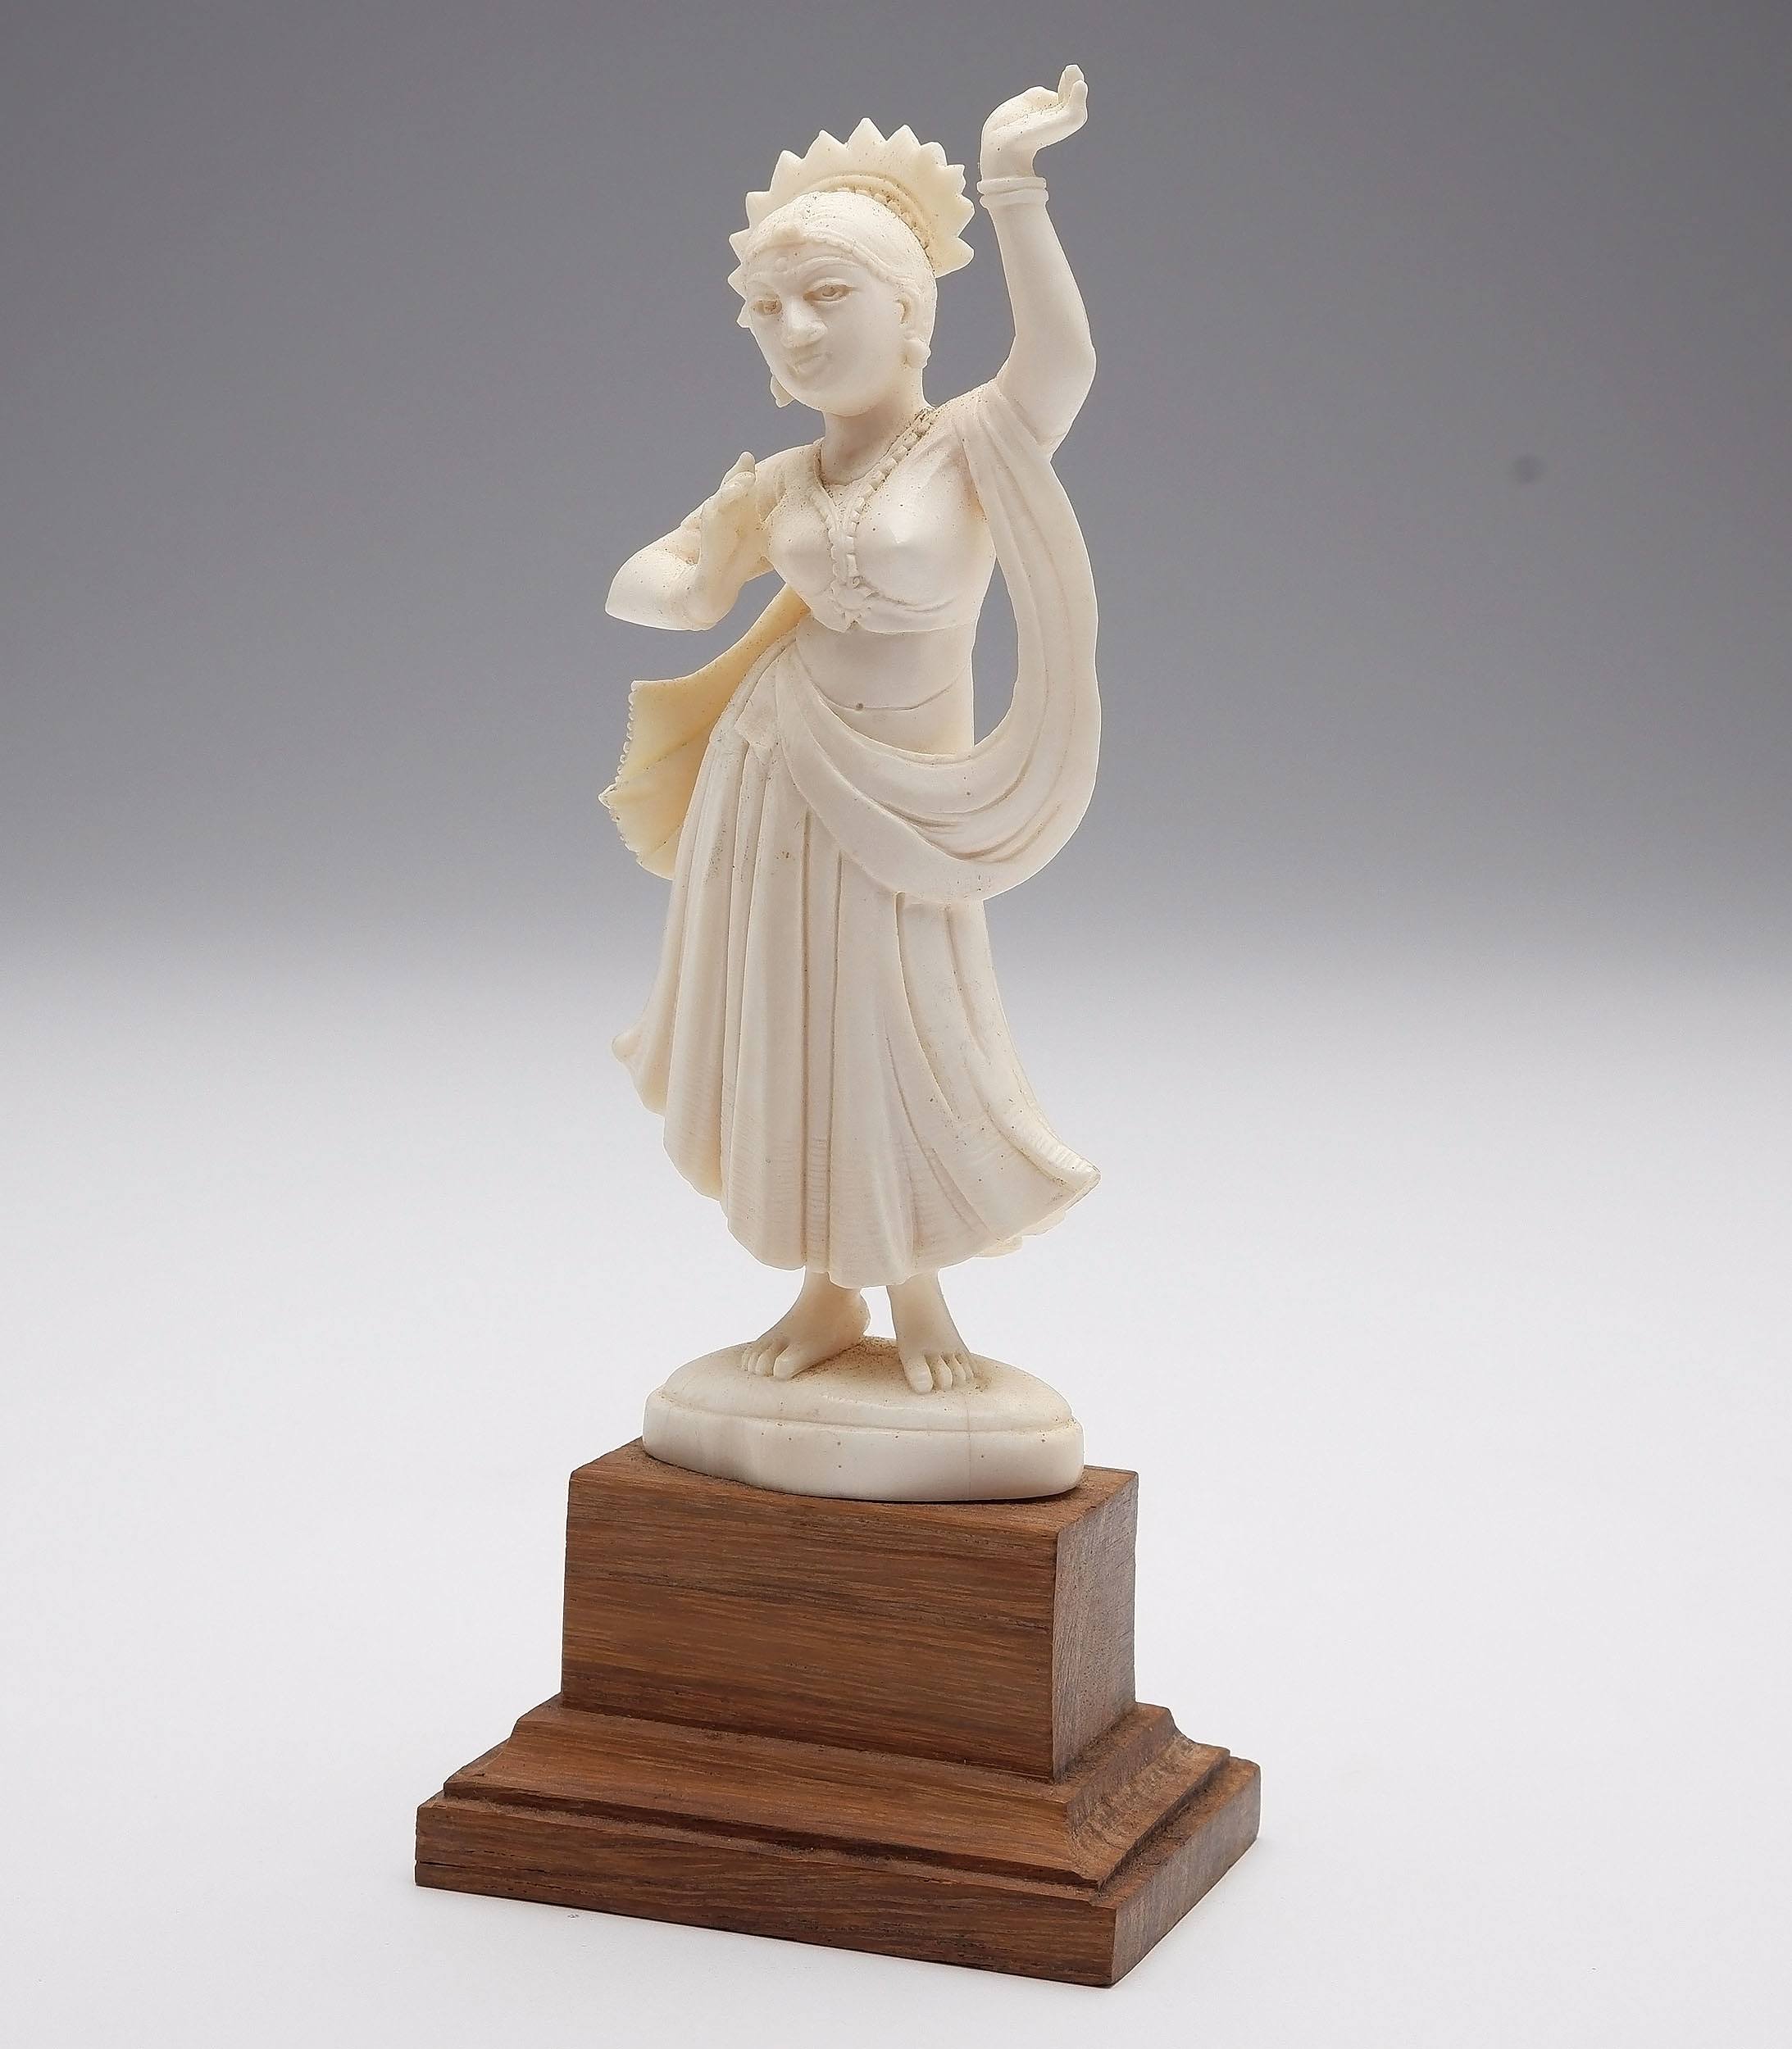 'Indian Carved Ivory Figure of Dancing Krishna, Early to Mid 20th Century'